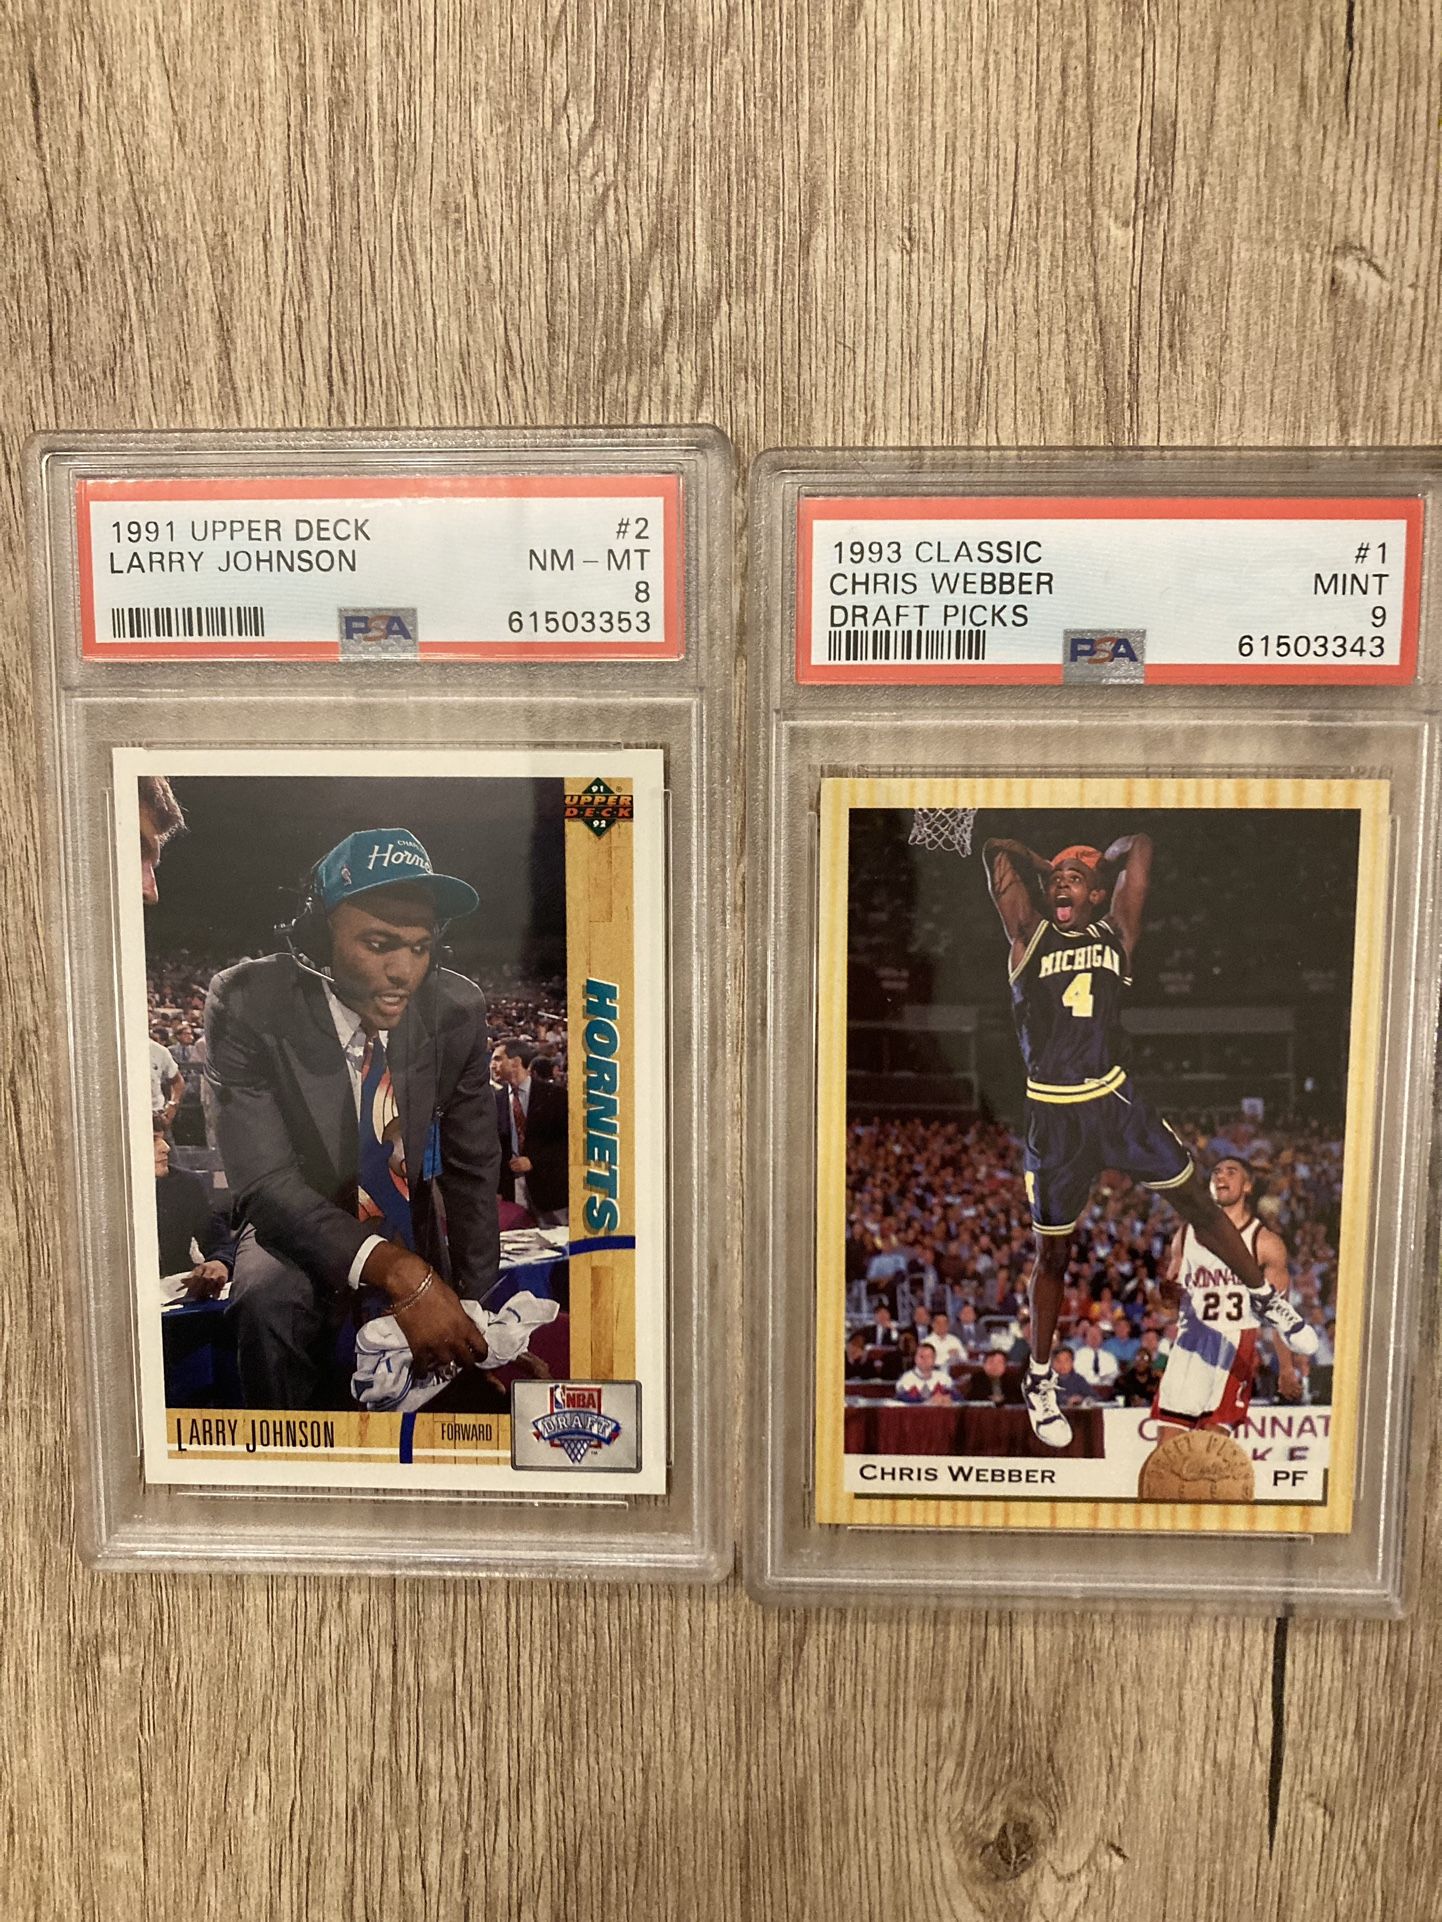 Chris Webber and Larry Johnson Graded Rookie Cards